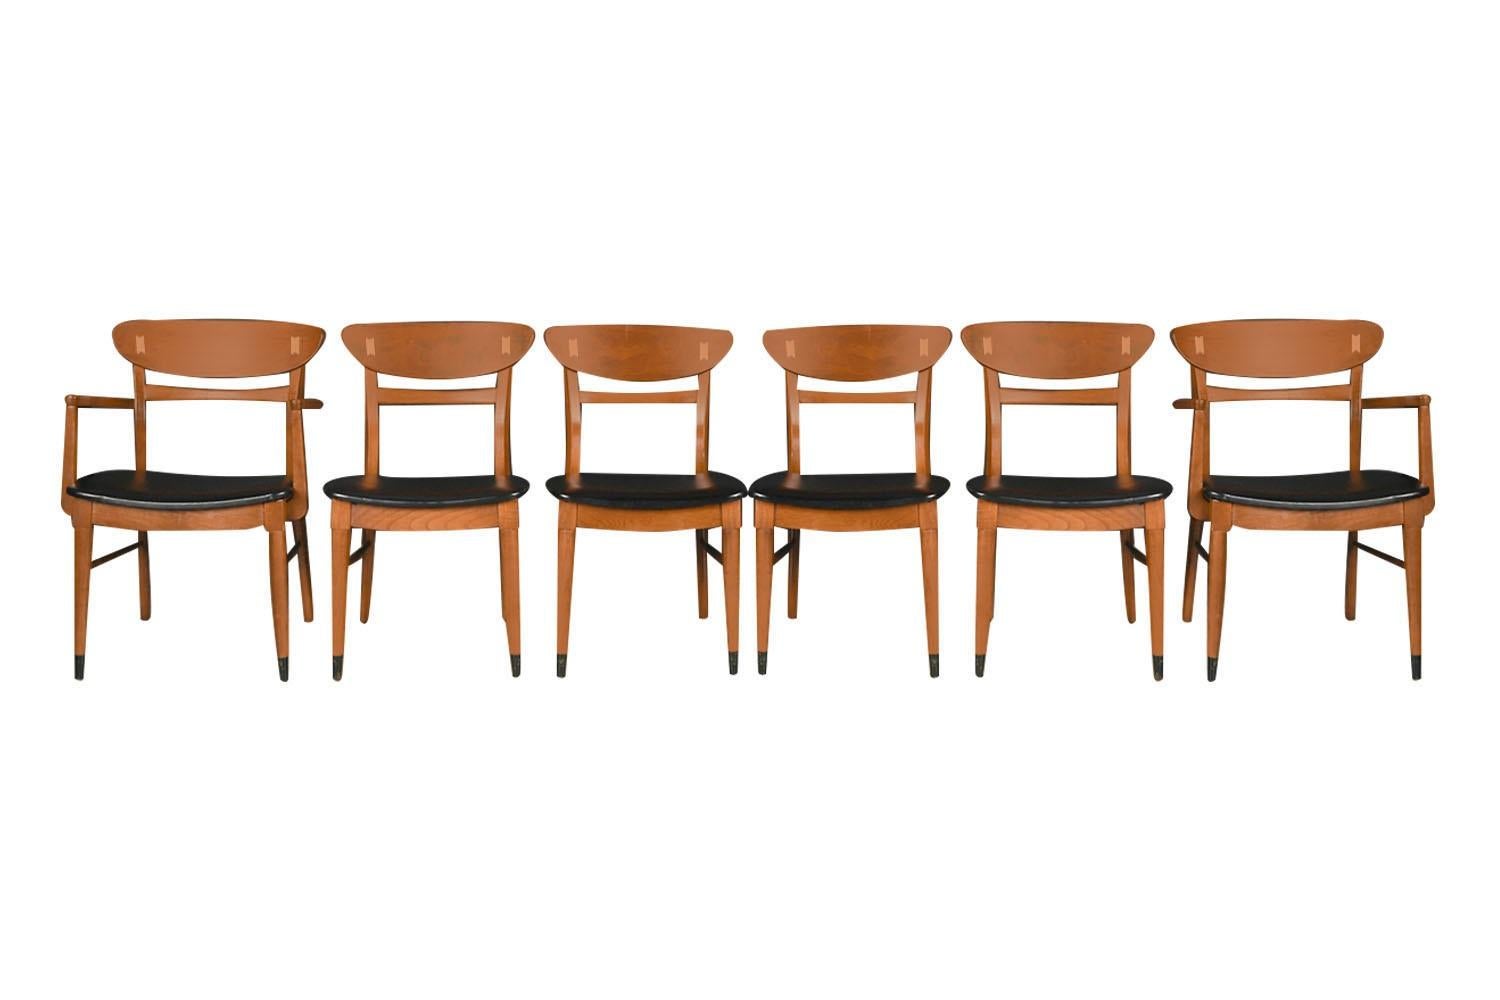 Incredibly well constructed set of six dining chairs from the highly collectible 'Acclaim' series by Lane Furniture, Alta Vista, Virginia circa 1960s. This beautiful rare set of walnut dining chairs designed by Andre Bus feature two captain